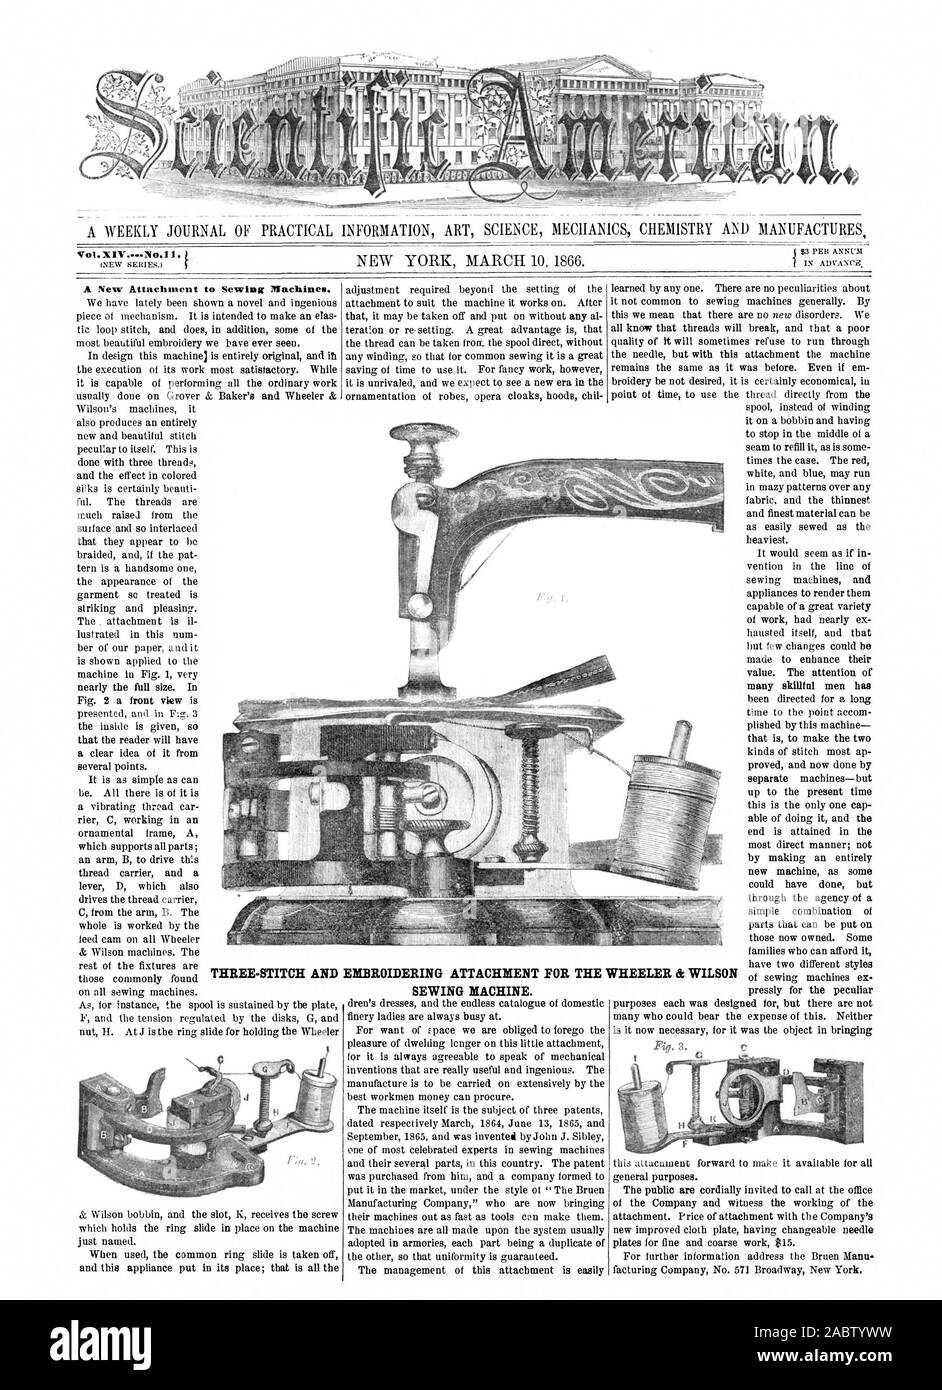 A WEEKLY JOURNAL OF PRACTICAL INFORMATION ART SCIENCE MECHANICS CHEMISTRY AND MANUFACTURES Voi.XIV N A New Attachment to Sewing Machines. THREE-STITCH AND EMBROIDERING ATTACHMENT FOR THE WHEELER & WILSON SEWING MACHINE., scientific american, 66-03-10 Stock Photo